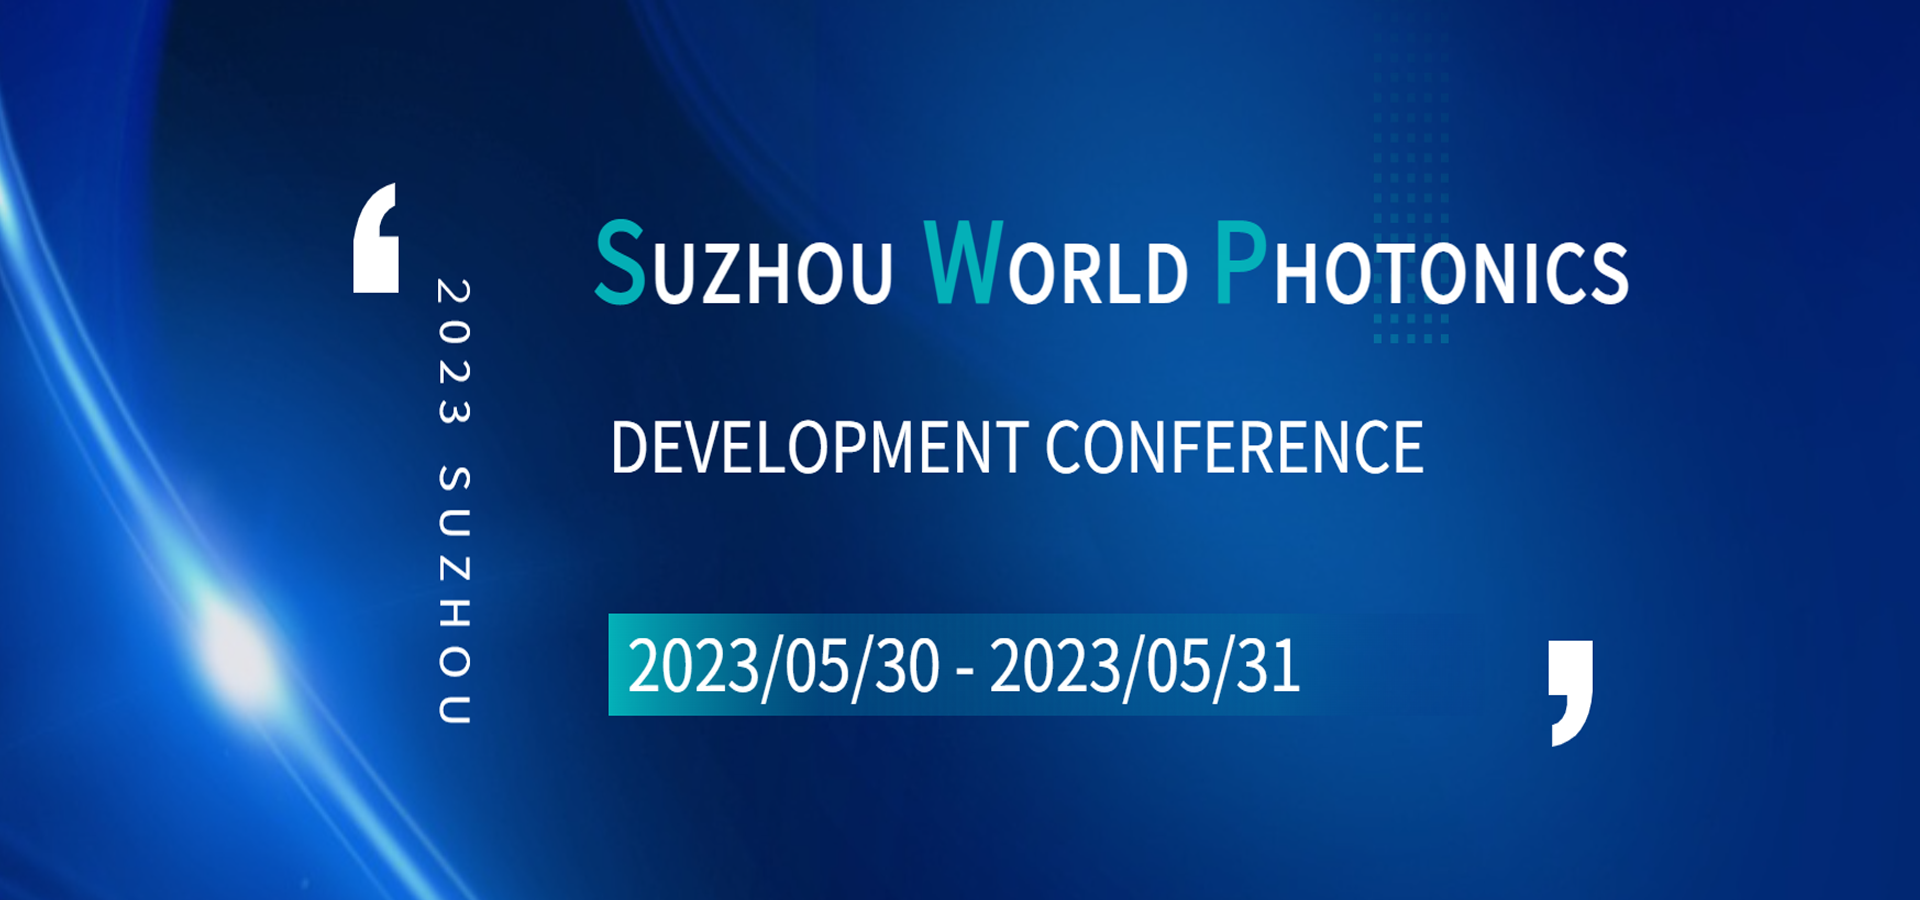 2023 China (Suzhou) World Photonics Industry Development Conference will be held in Suzhou at the end of May